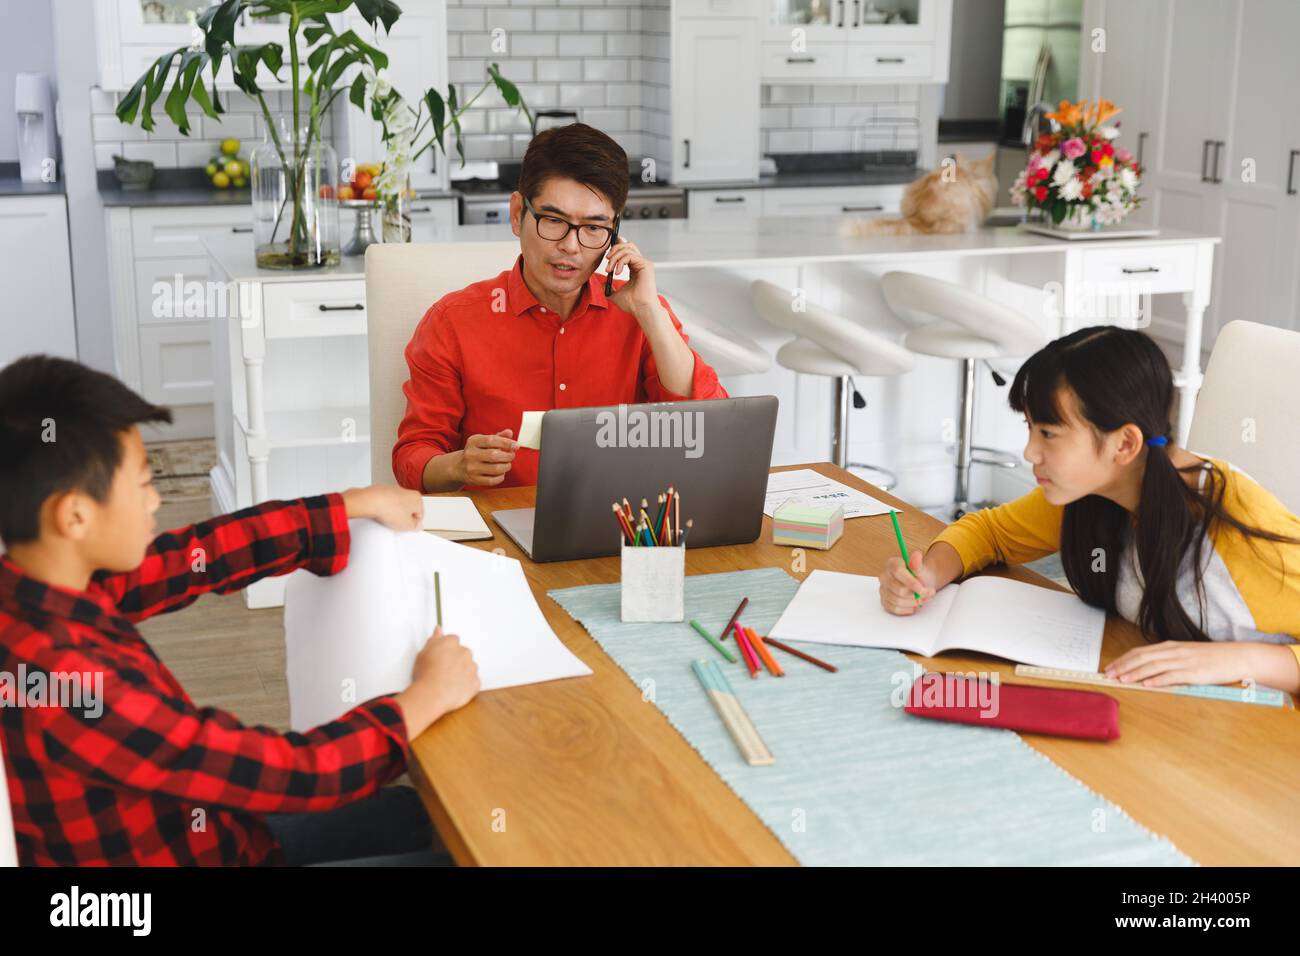 Asian father working on laptop at table with son and daughter doing school work Stock Photo